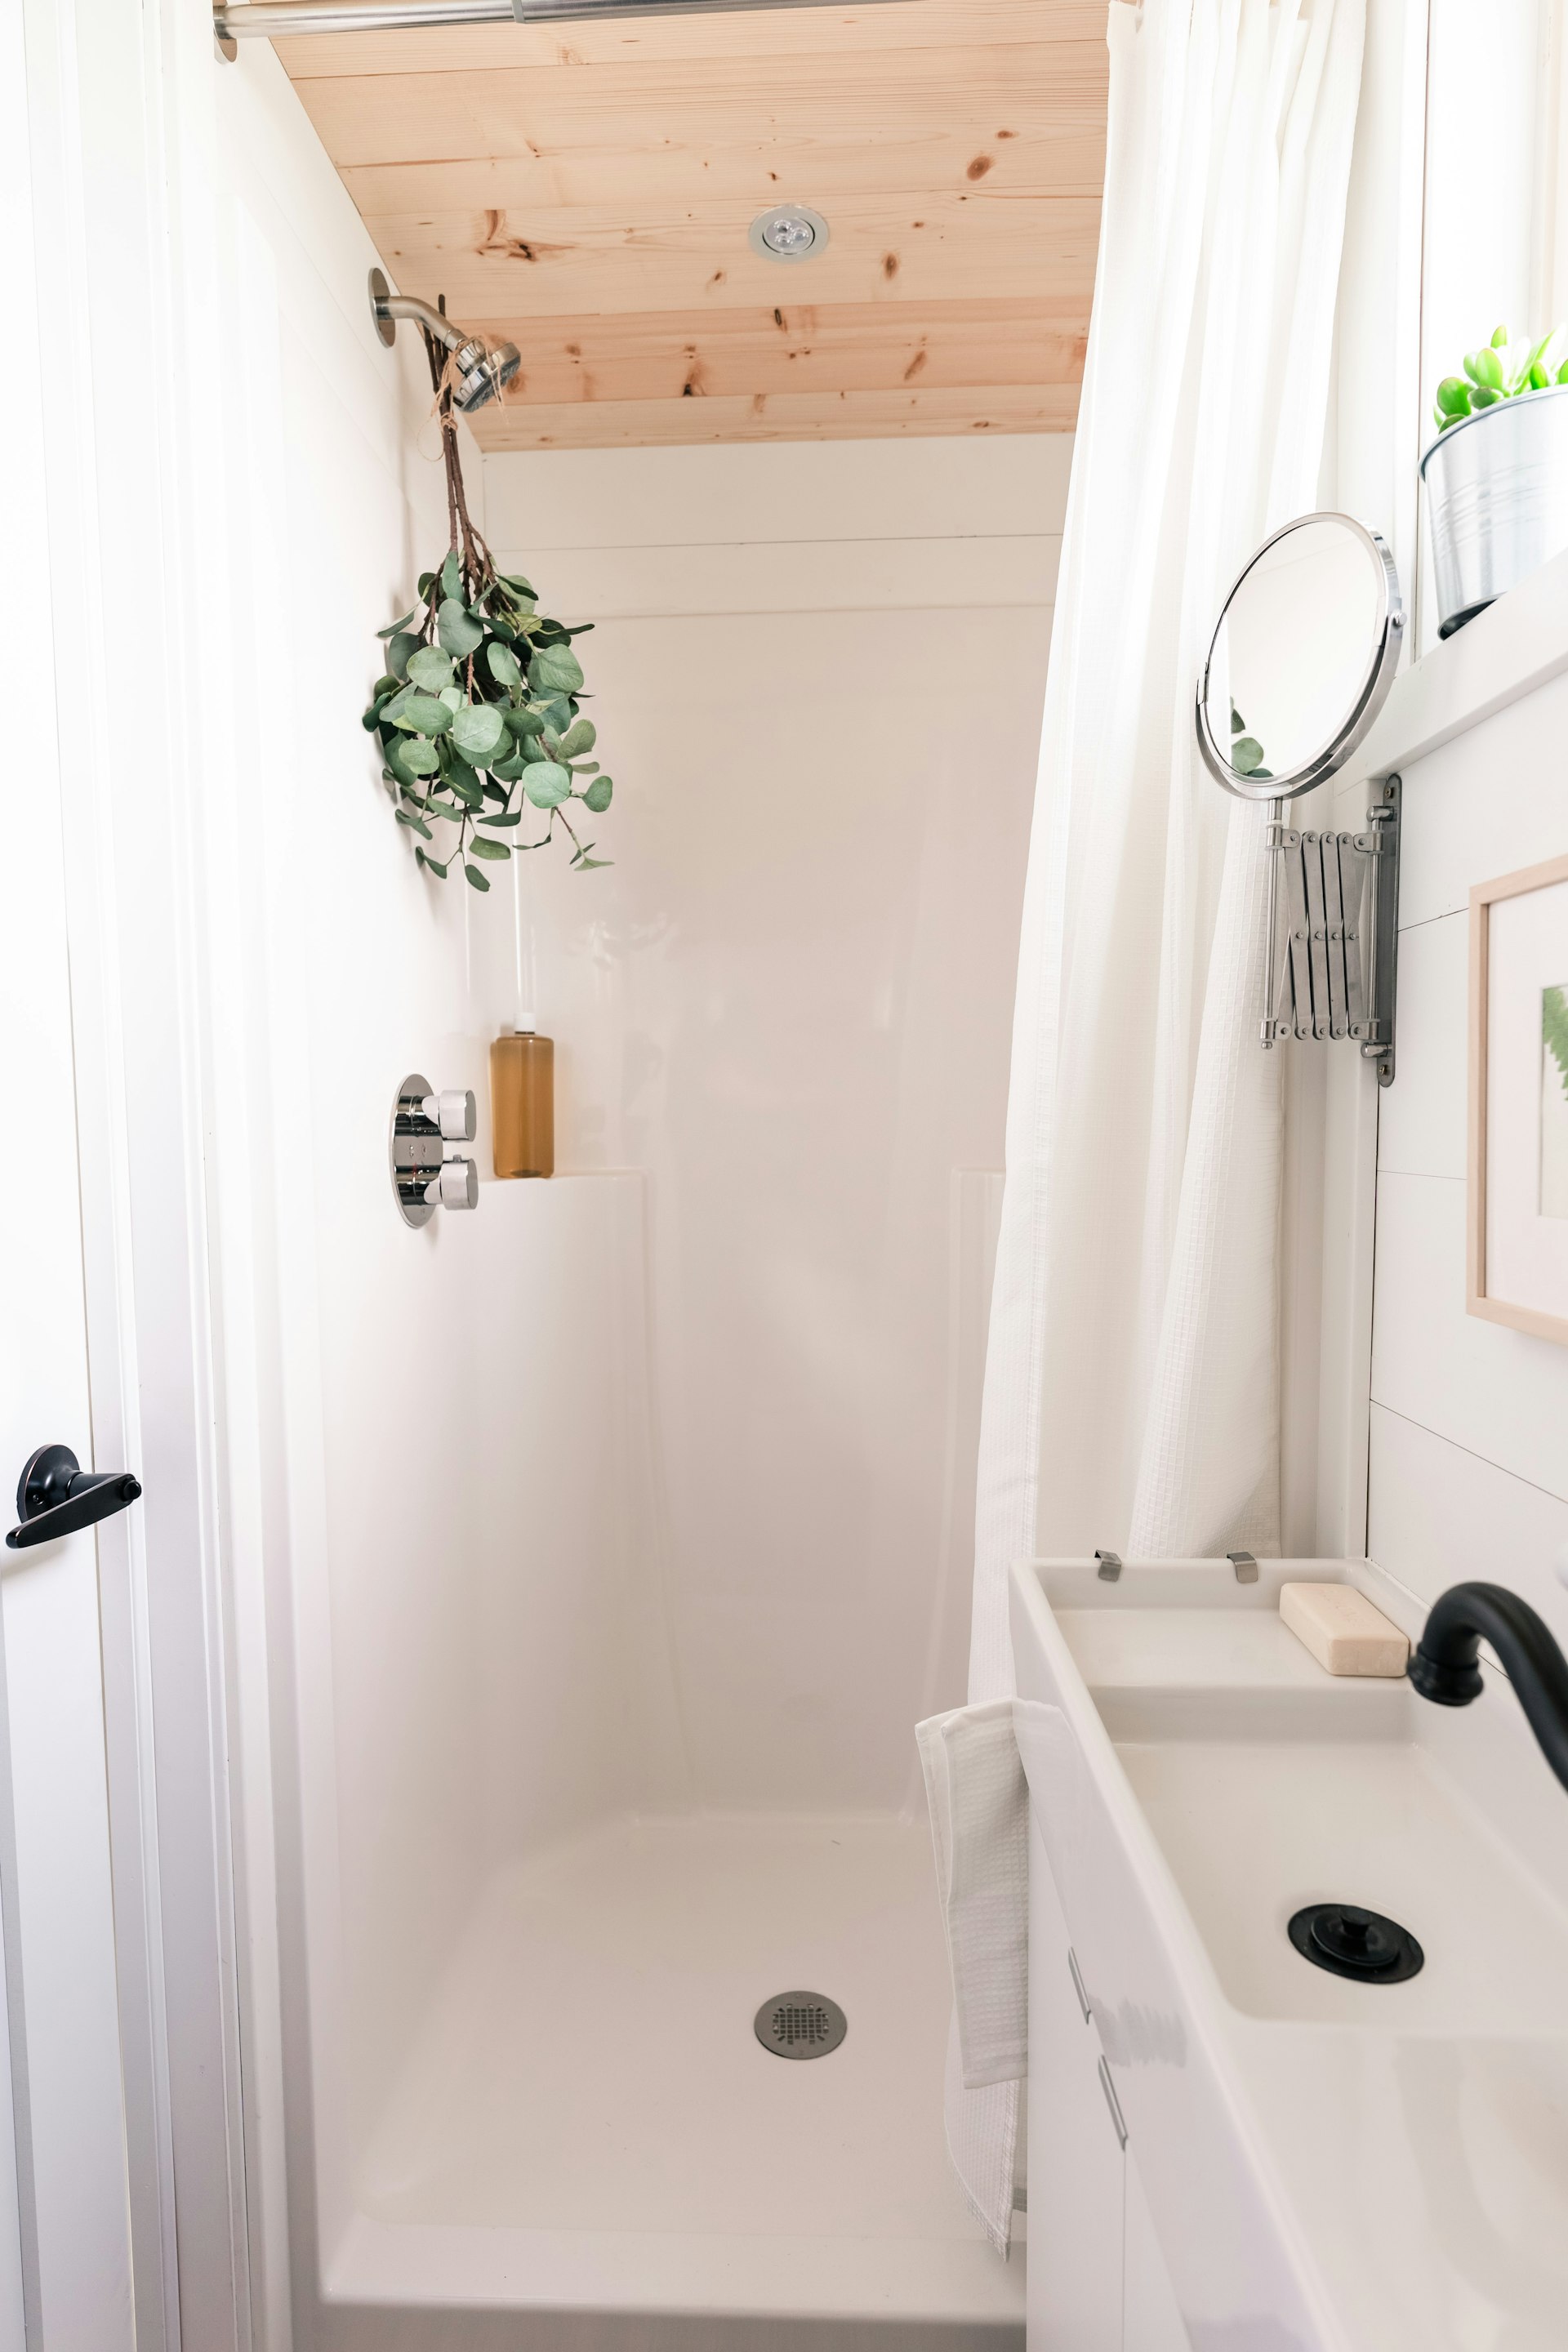 White shower unit with potted plant